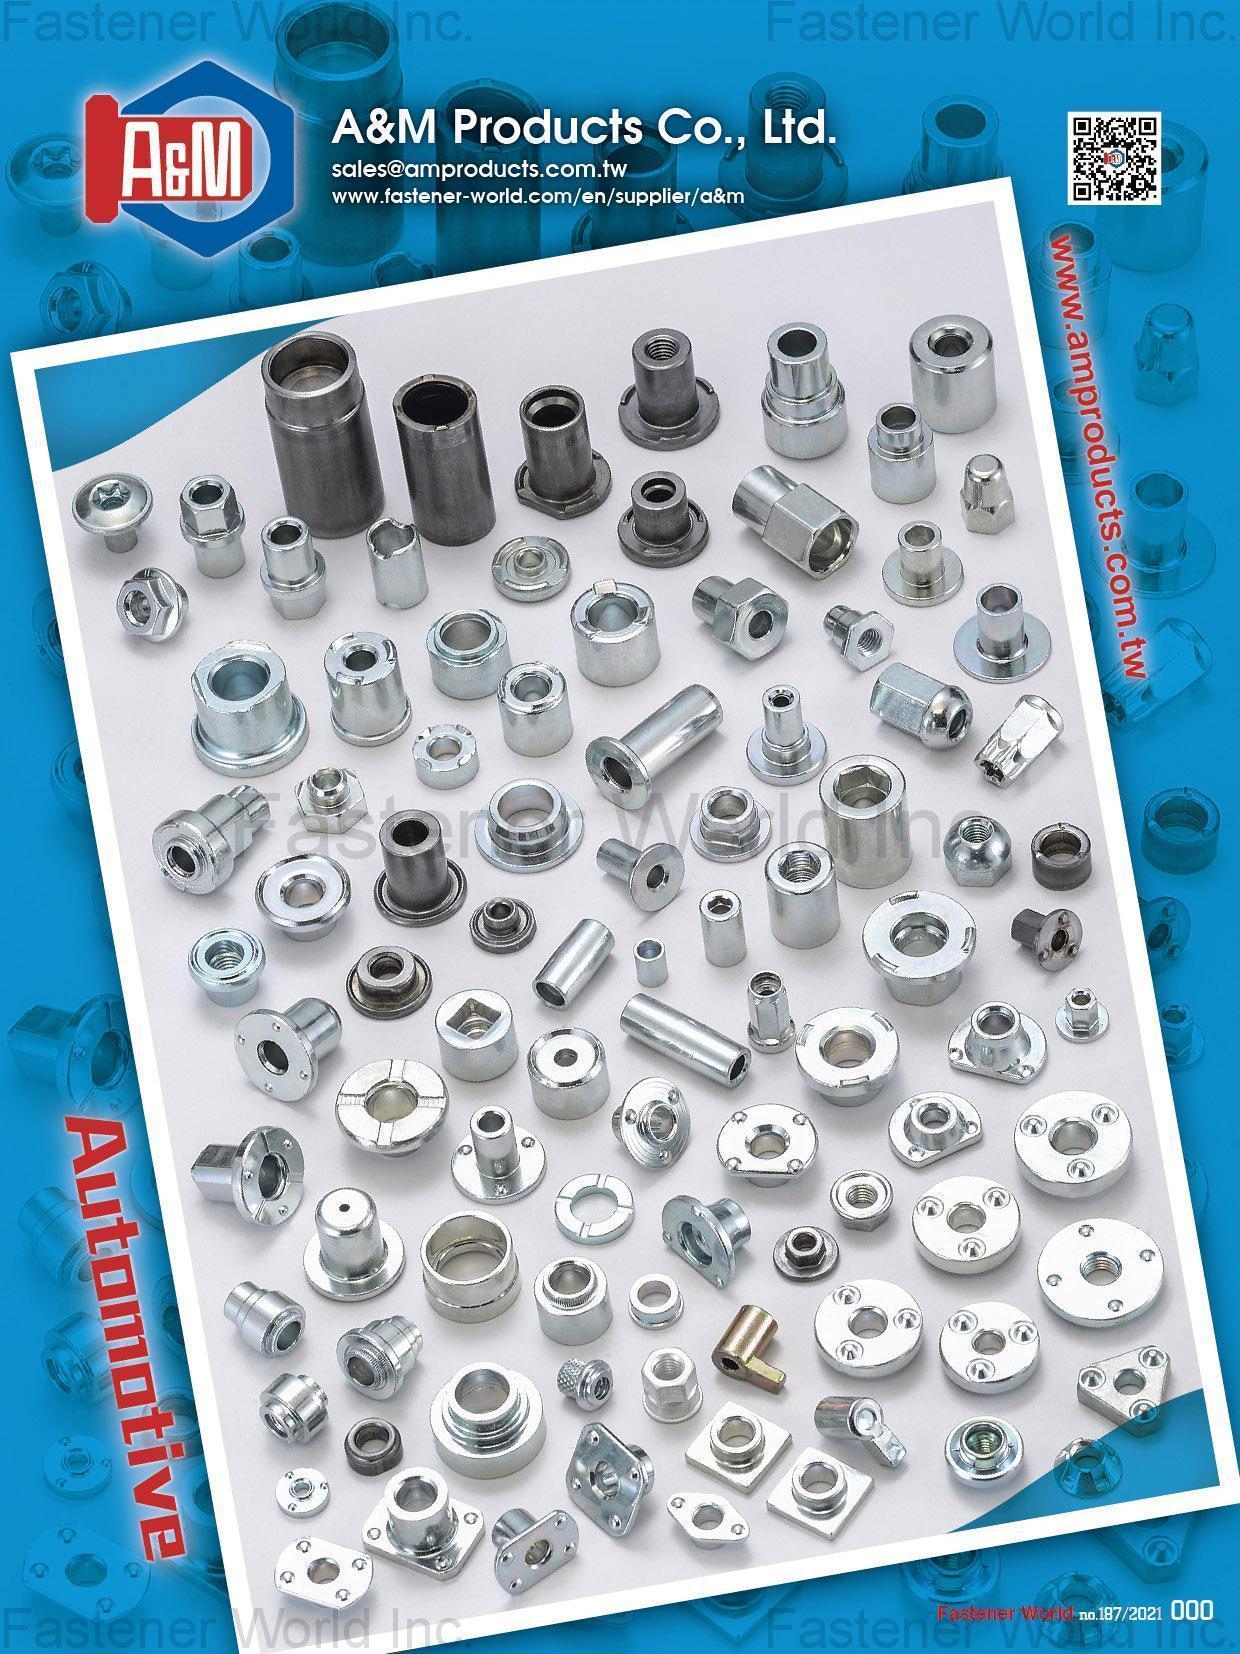 A & M PRODUCTS CO., LTD. , WELD NUTS,SPECIAL NUTS,NUT AND WASHER ASSEMBLY,SPECIAL SQUARE & HEX NUT,FLANGE NUTS,SPECIAL NUTS,NYLON FLANGE NUTS,PREVAILING TORQUE NUTS,WELD NUTS,BUSHING AND SPACER,SPECIAL NUTS,SPECIAL FLANGE NUTS